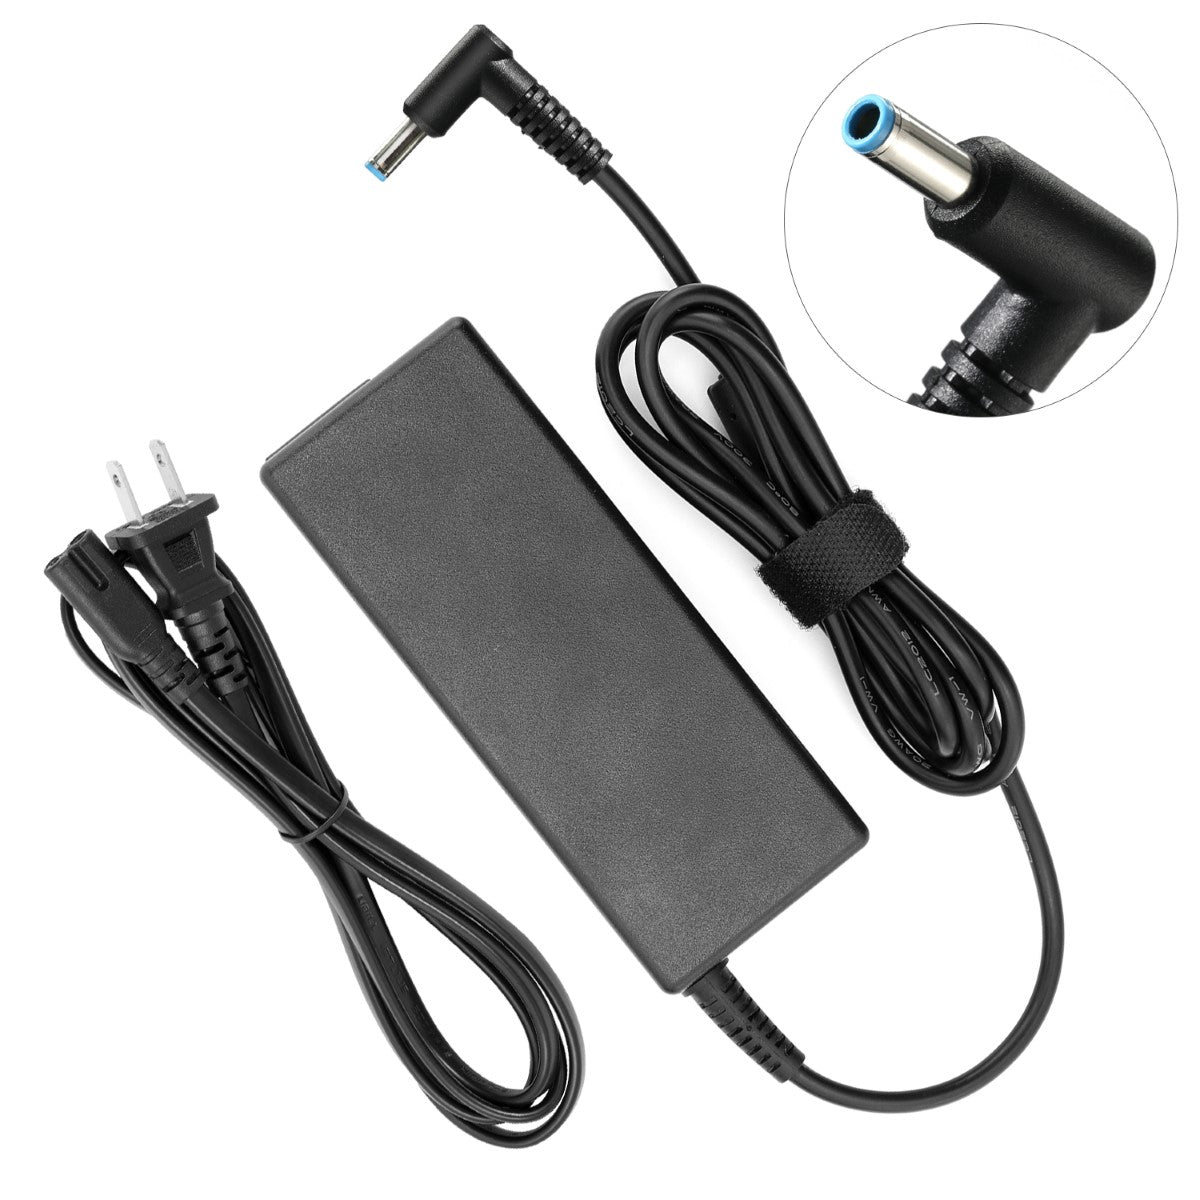 AC Adapter Charger for HP Pavilion 11-n010dx Notebook.